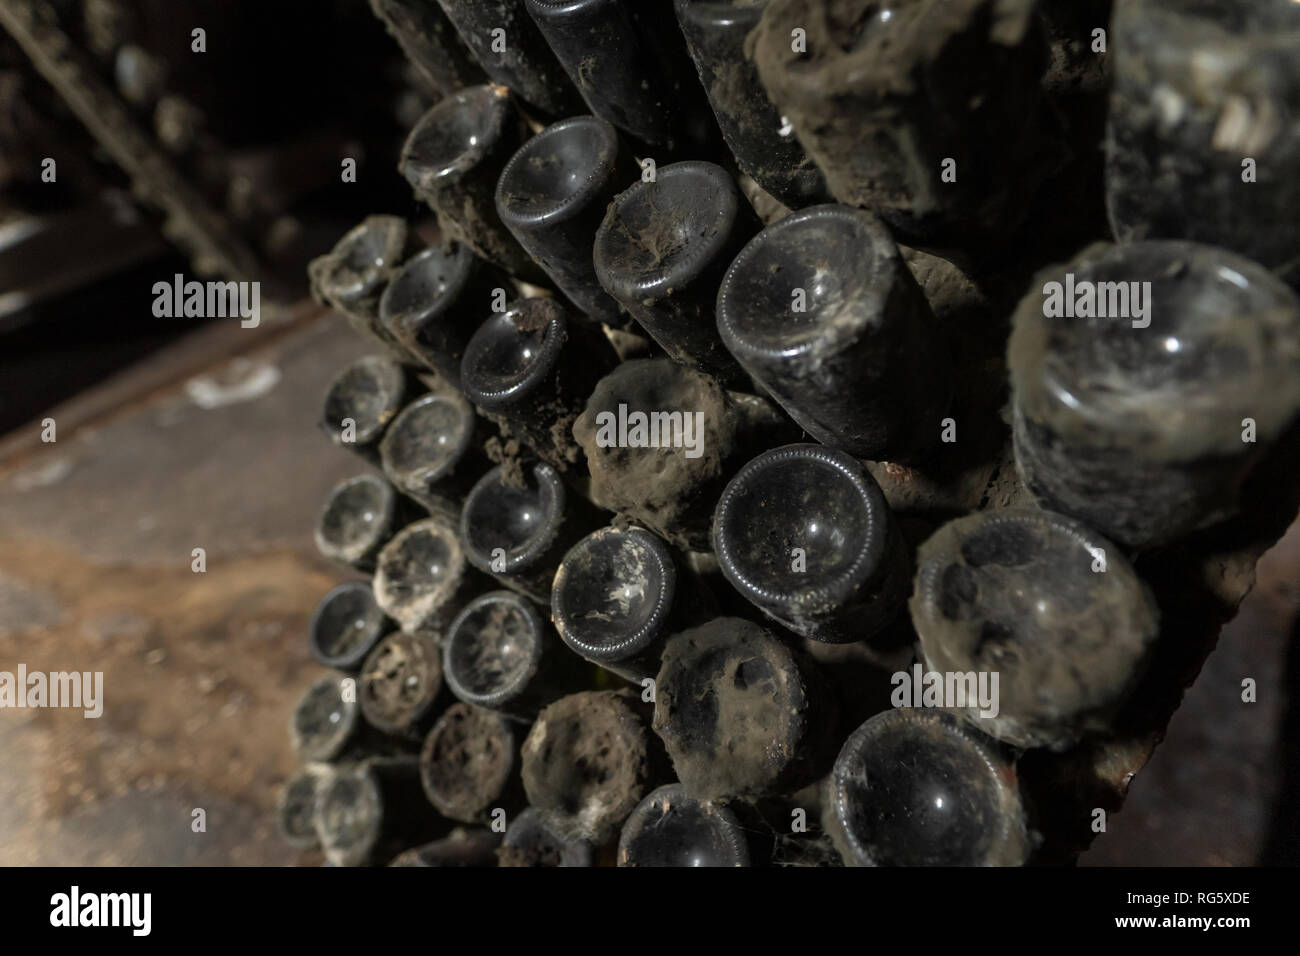 Wine aging bottles covered in dust and mold Stock Photo